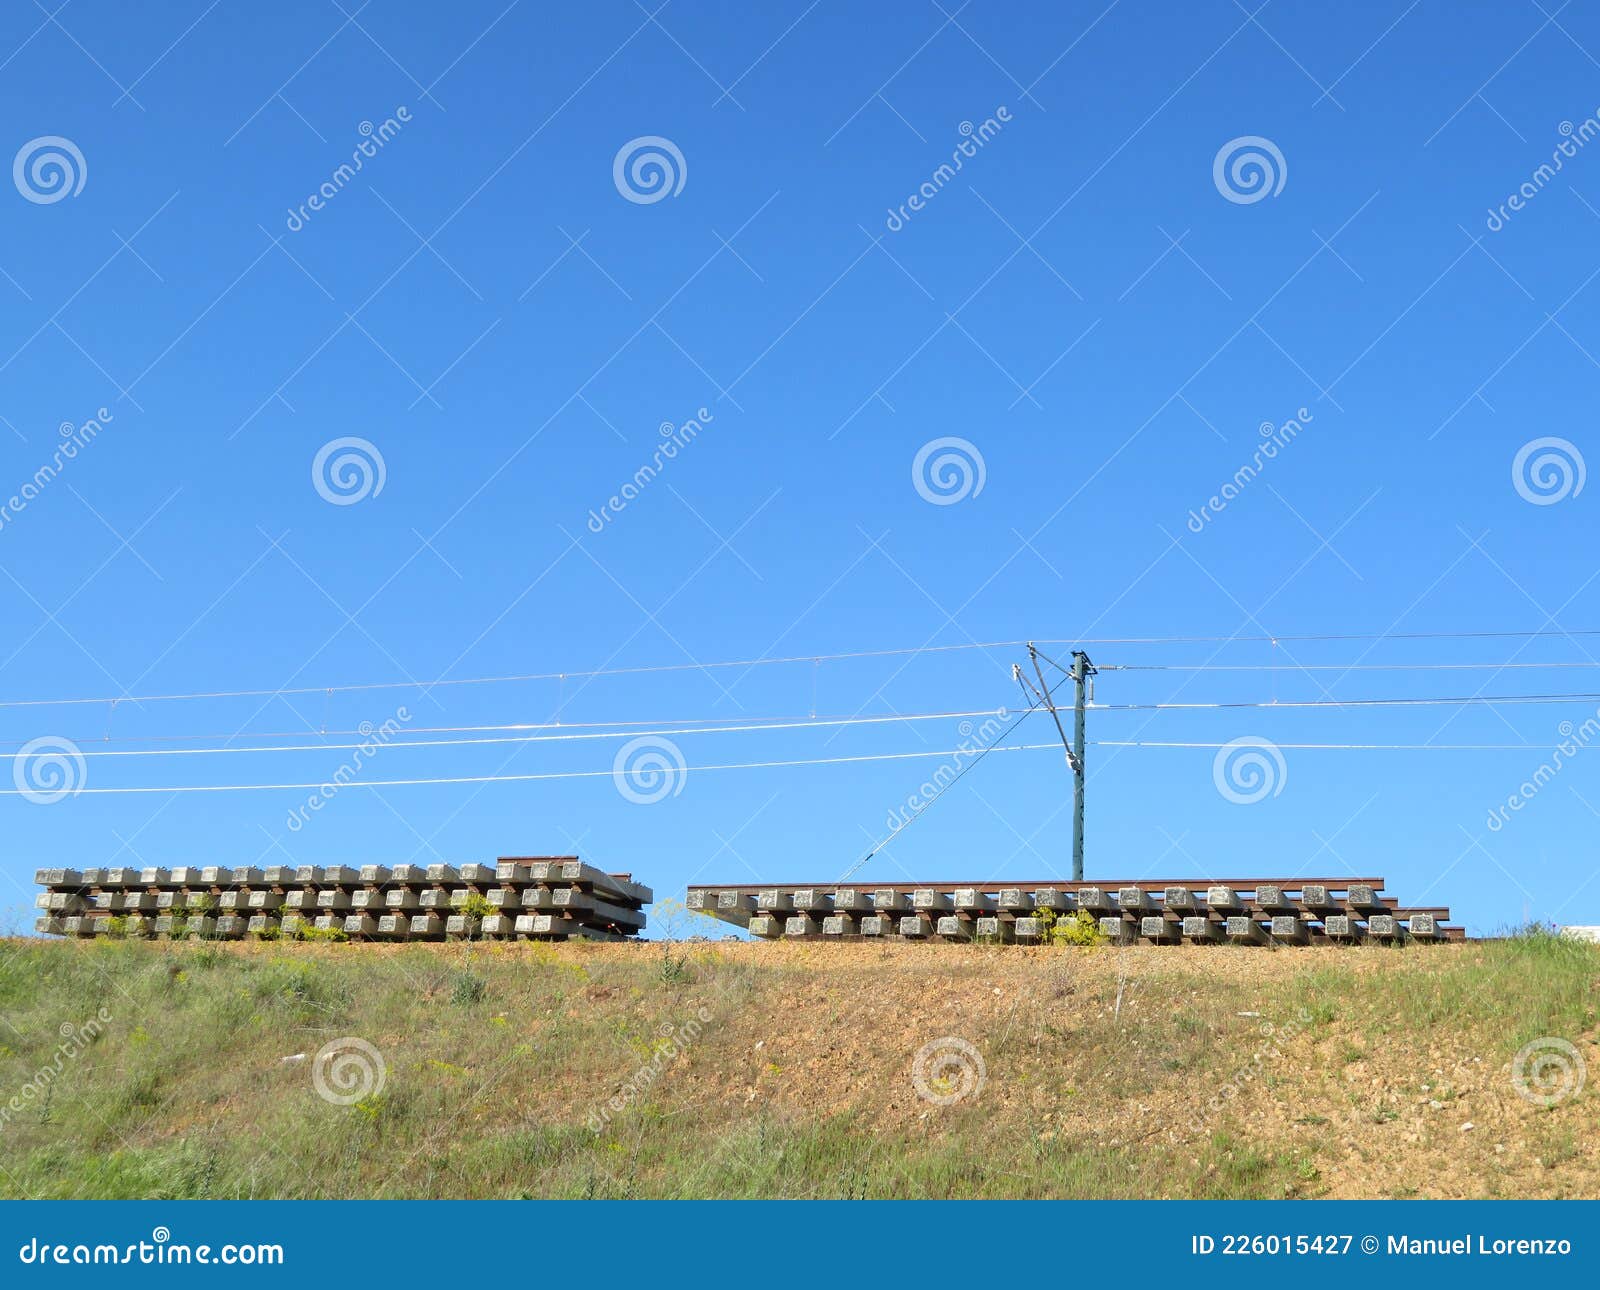 material to build the railroad tracks of high speed